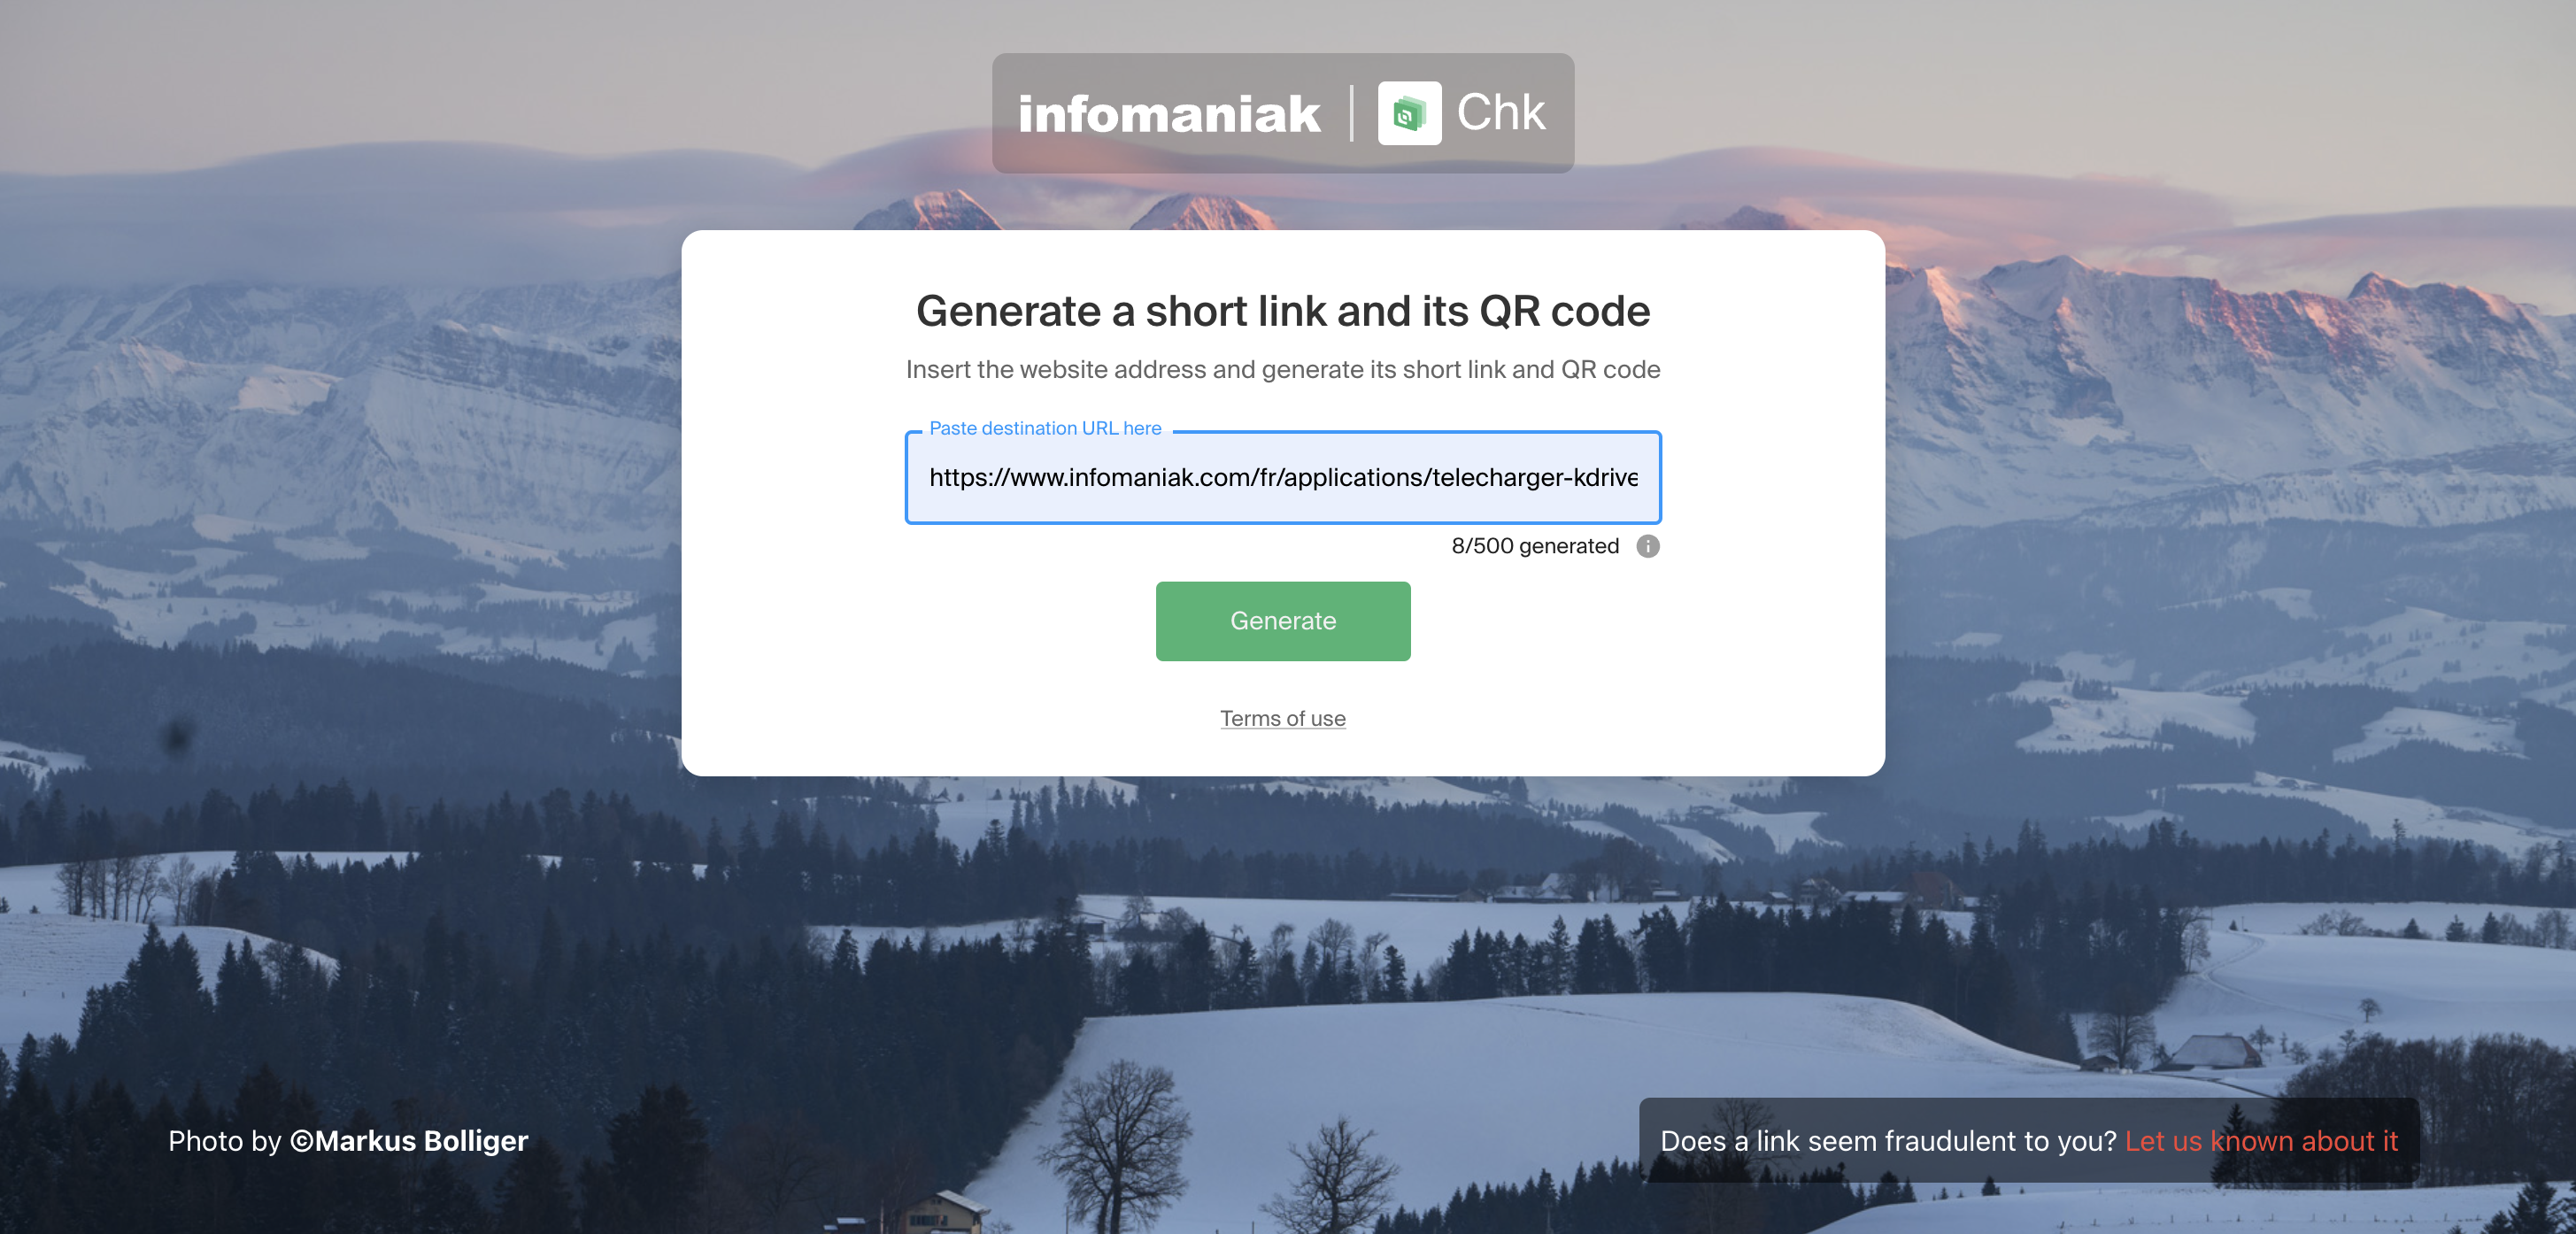 Interface No. 2 : Paste the link you wish to simplify or shorten 